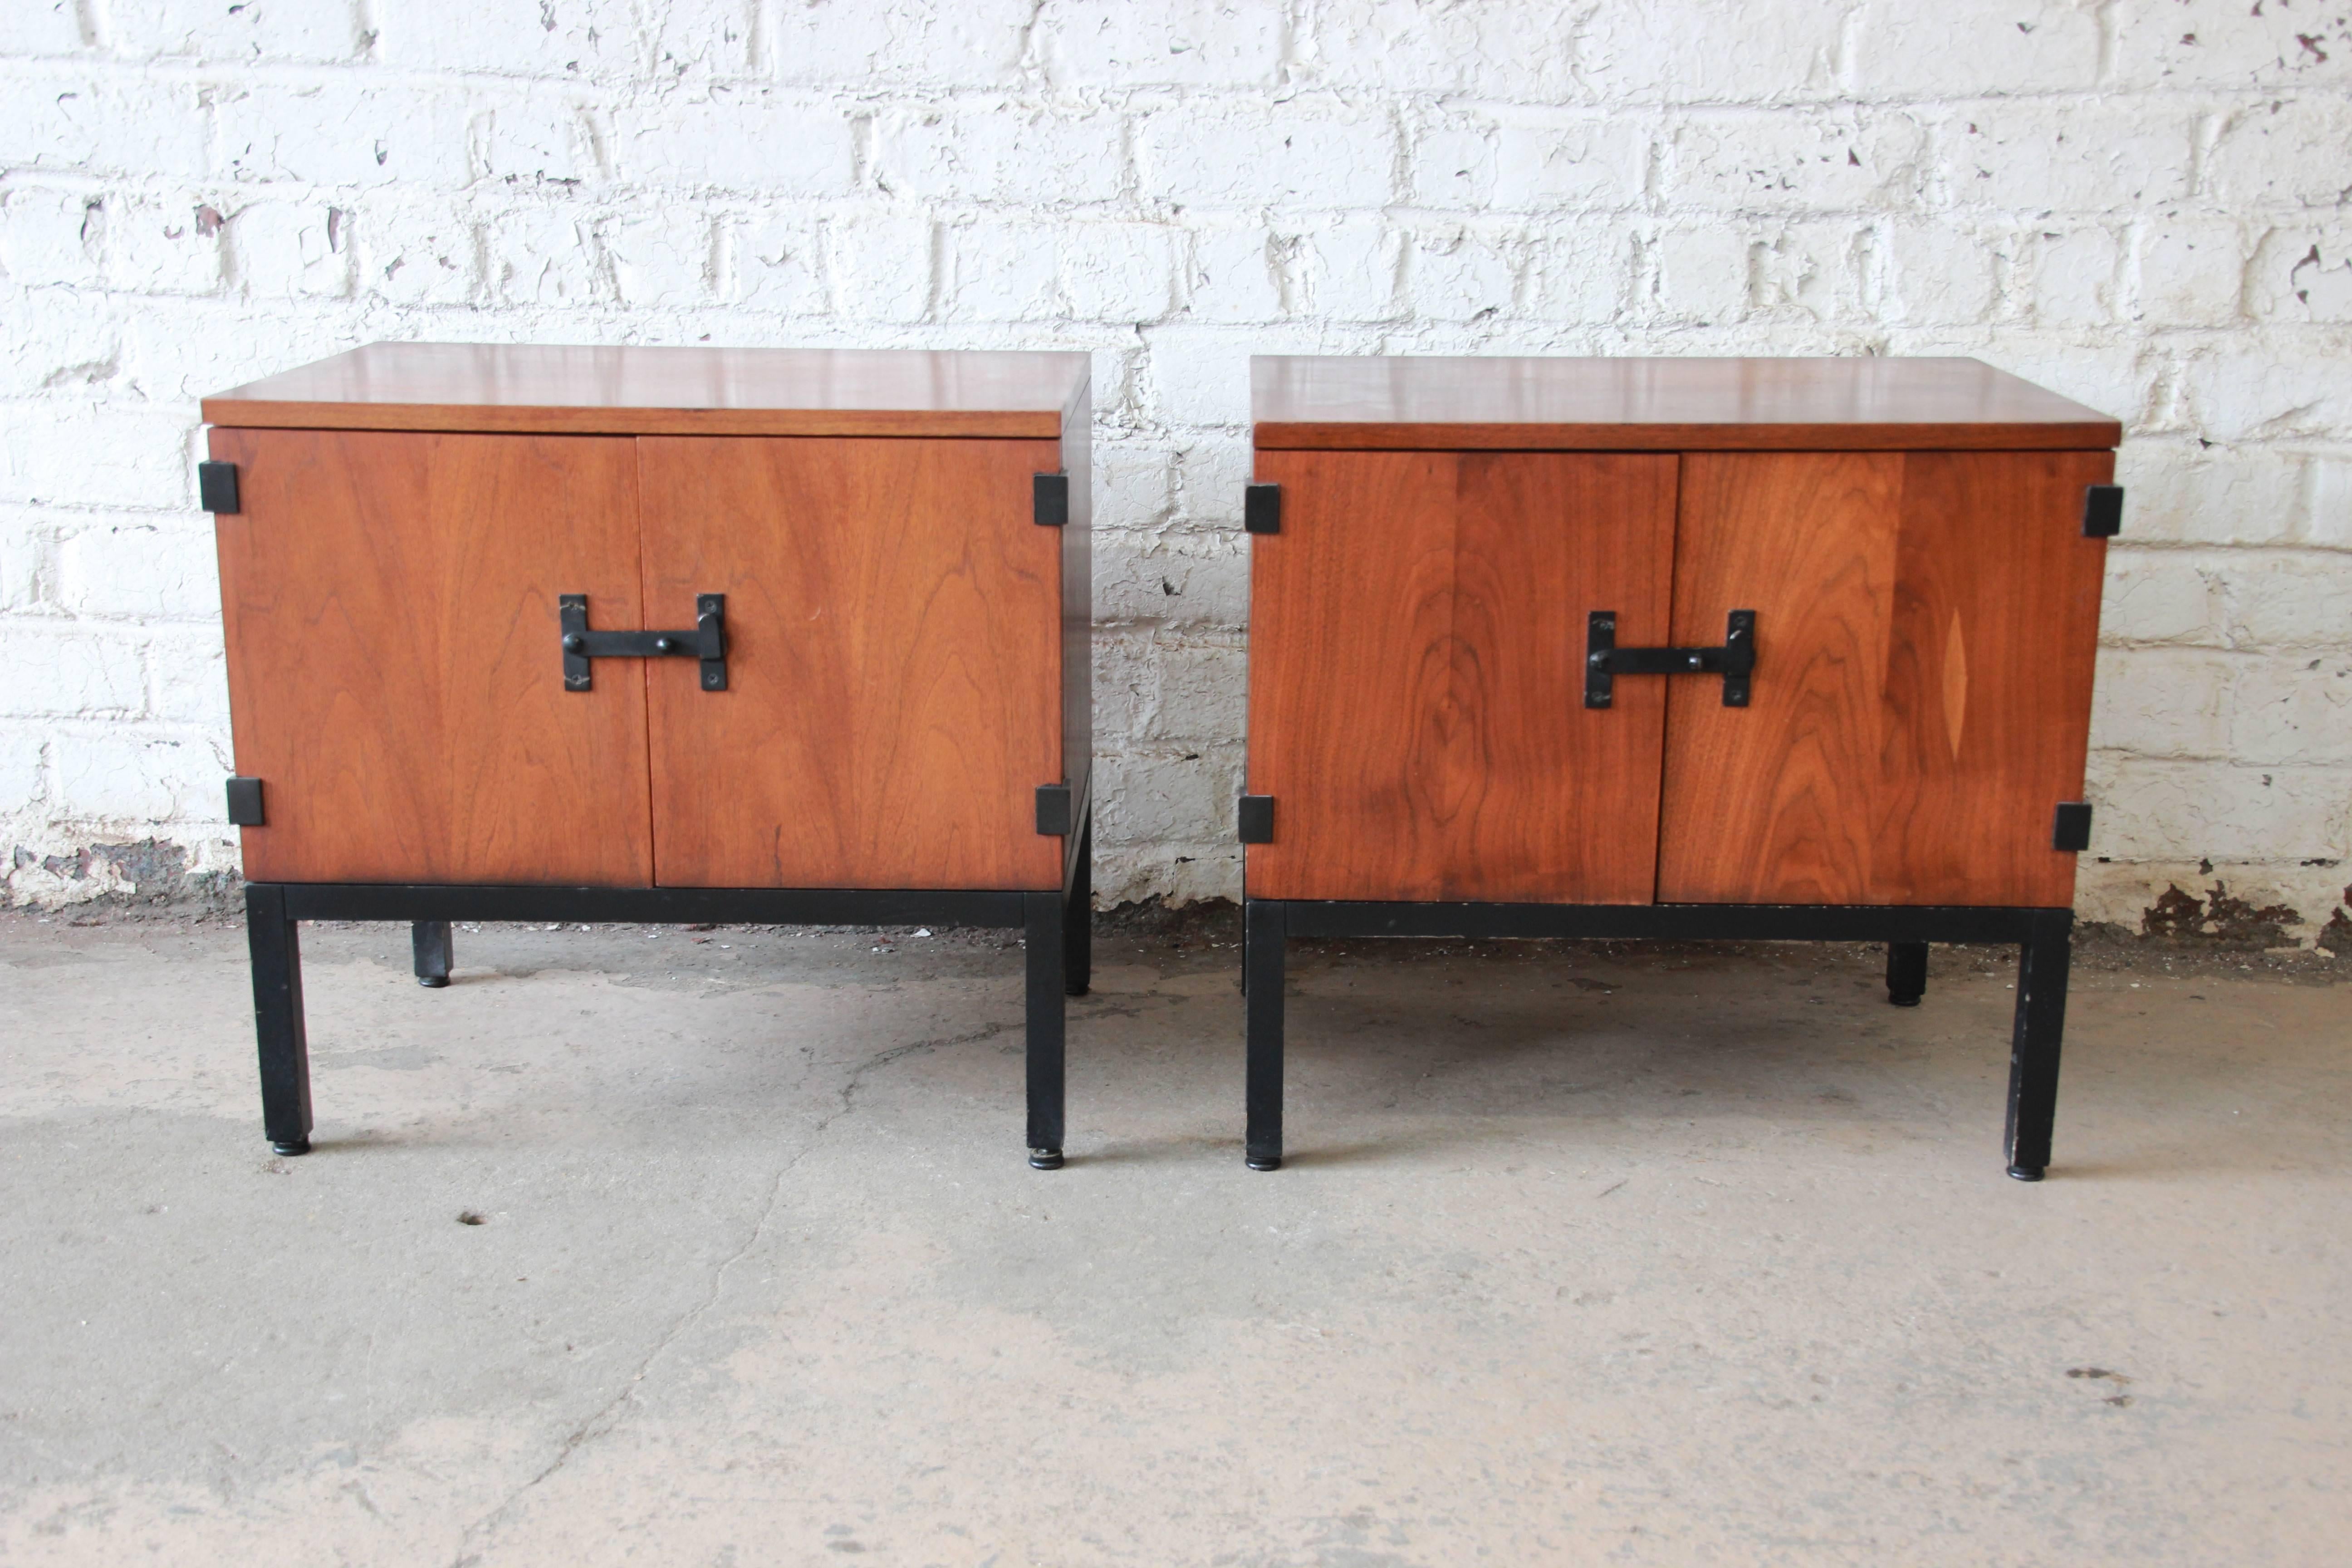 A stunning pair of Mid-Century Modern walnut nightstands or side tables designed by Kipp Stewart for Directional, circa 1960s. The tables feature gorgeous book-matched walnut wood grain, with sculpted ebonized pulls and ebonized bases. They offer